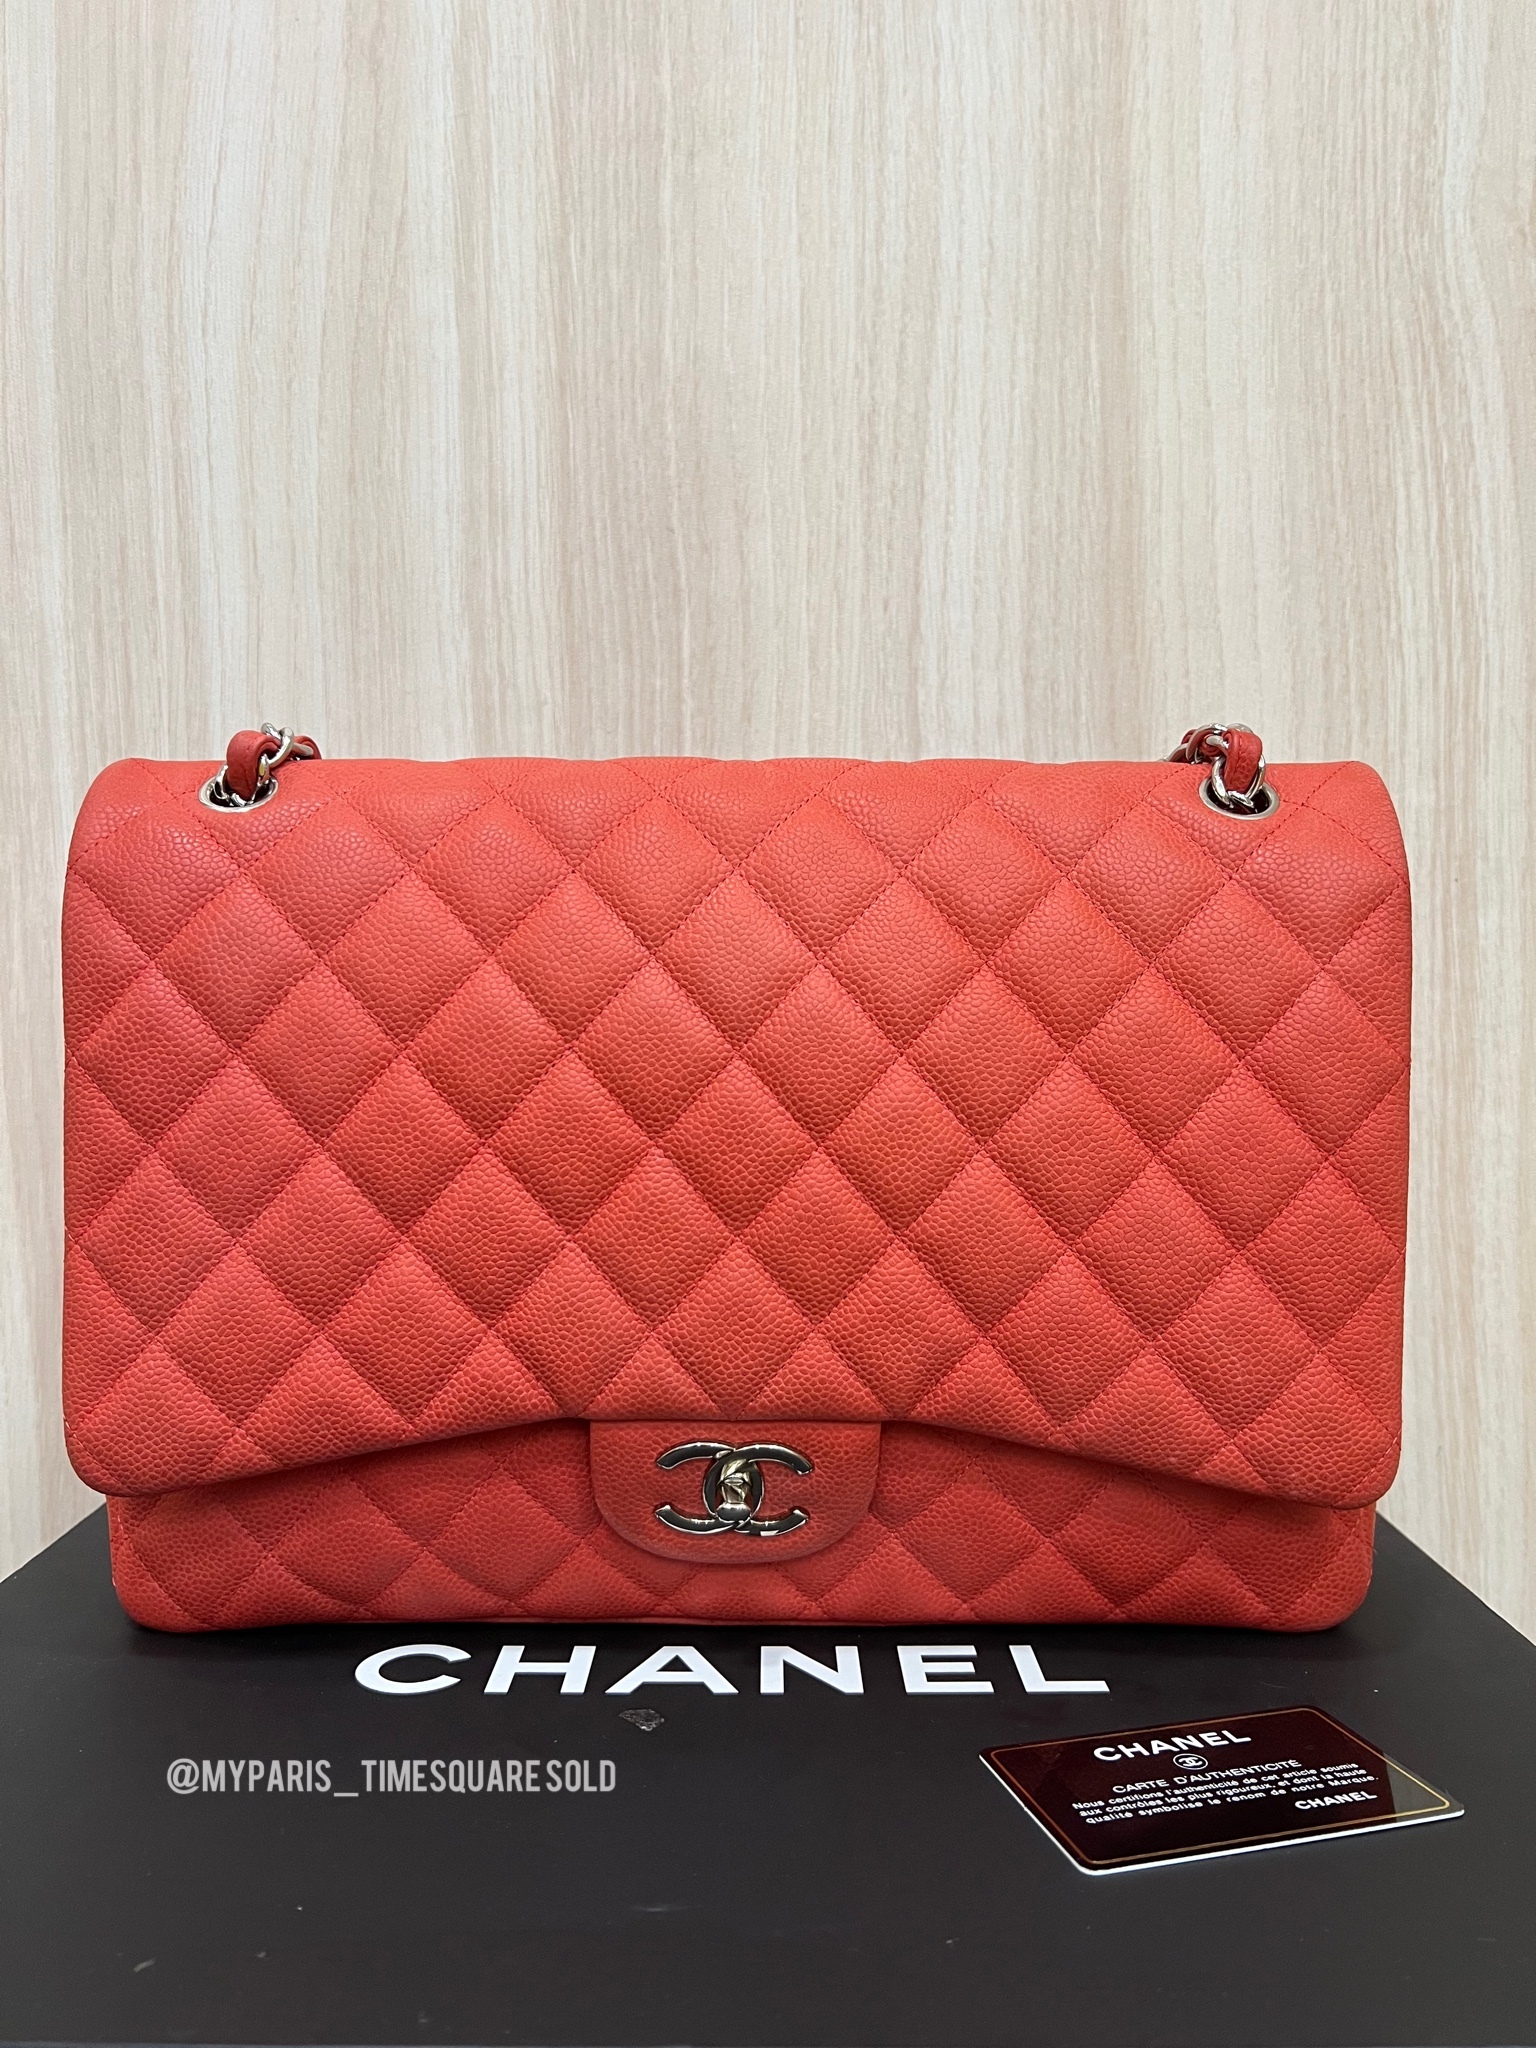 Chanel  Classic Flap Bag Review  The Happy Sloths Beauty Makeup and  Skincare Blog with Reviews and Swatches